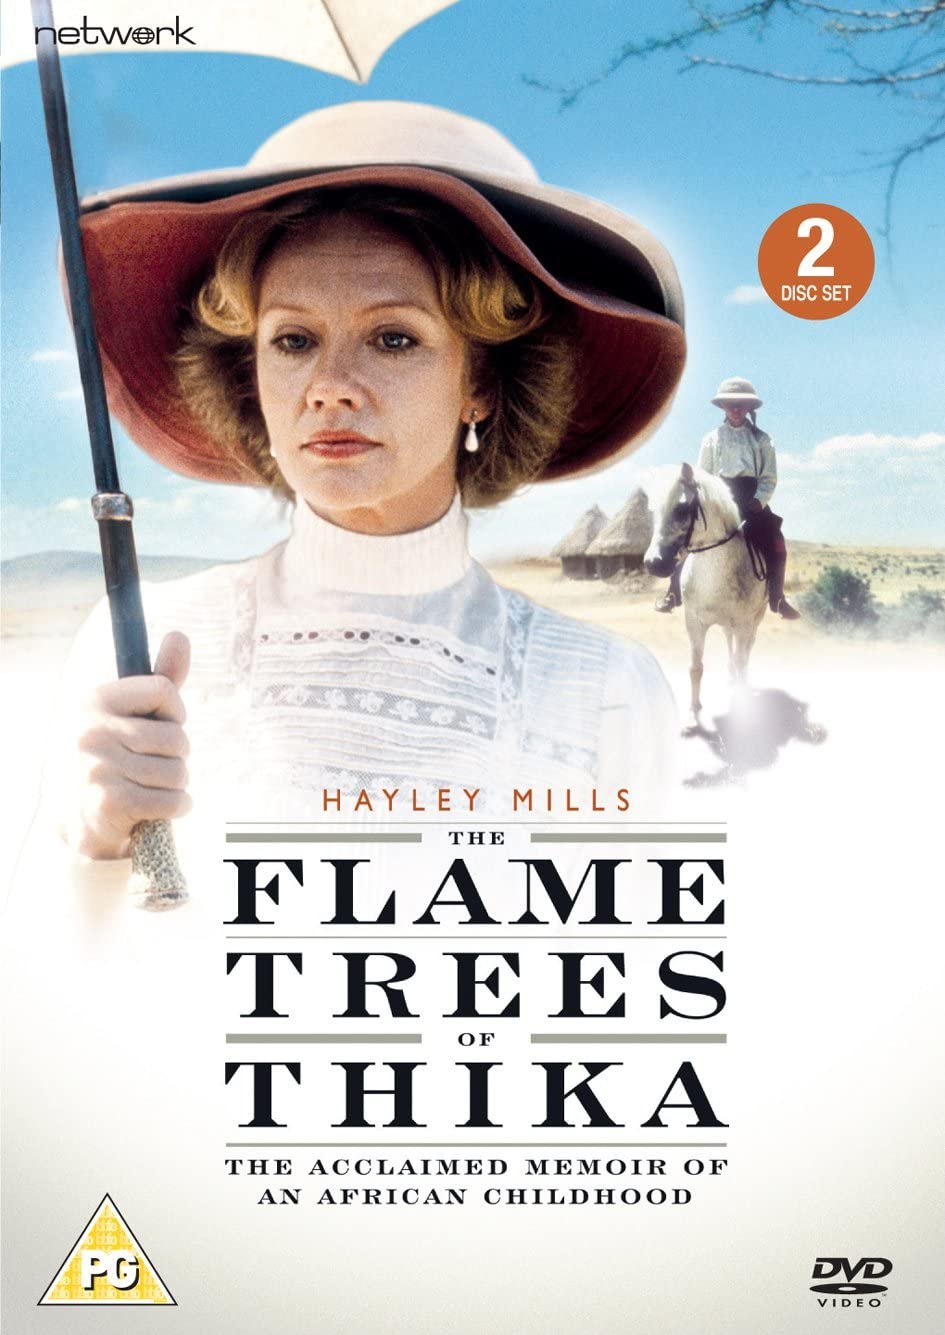 The Flame Trees of Thika: The Complete Series - [DVD]